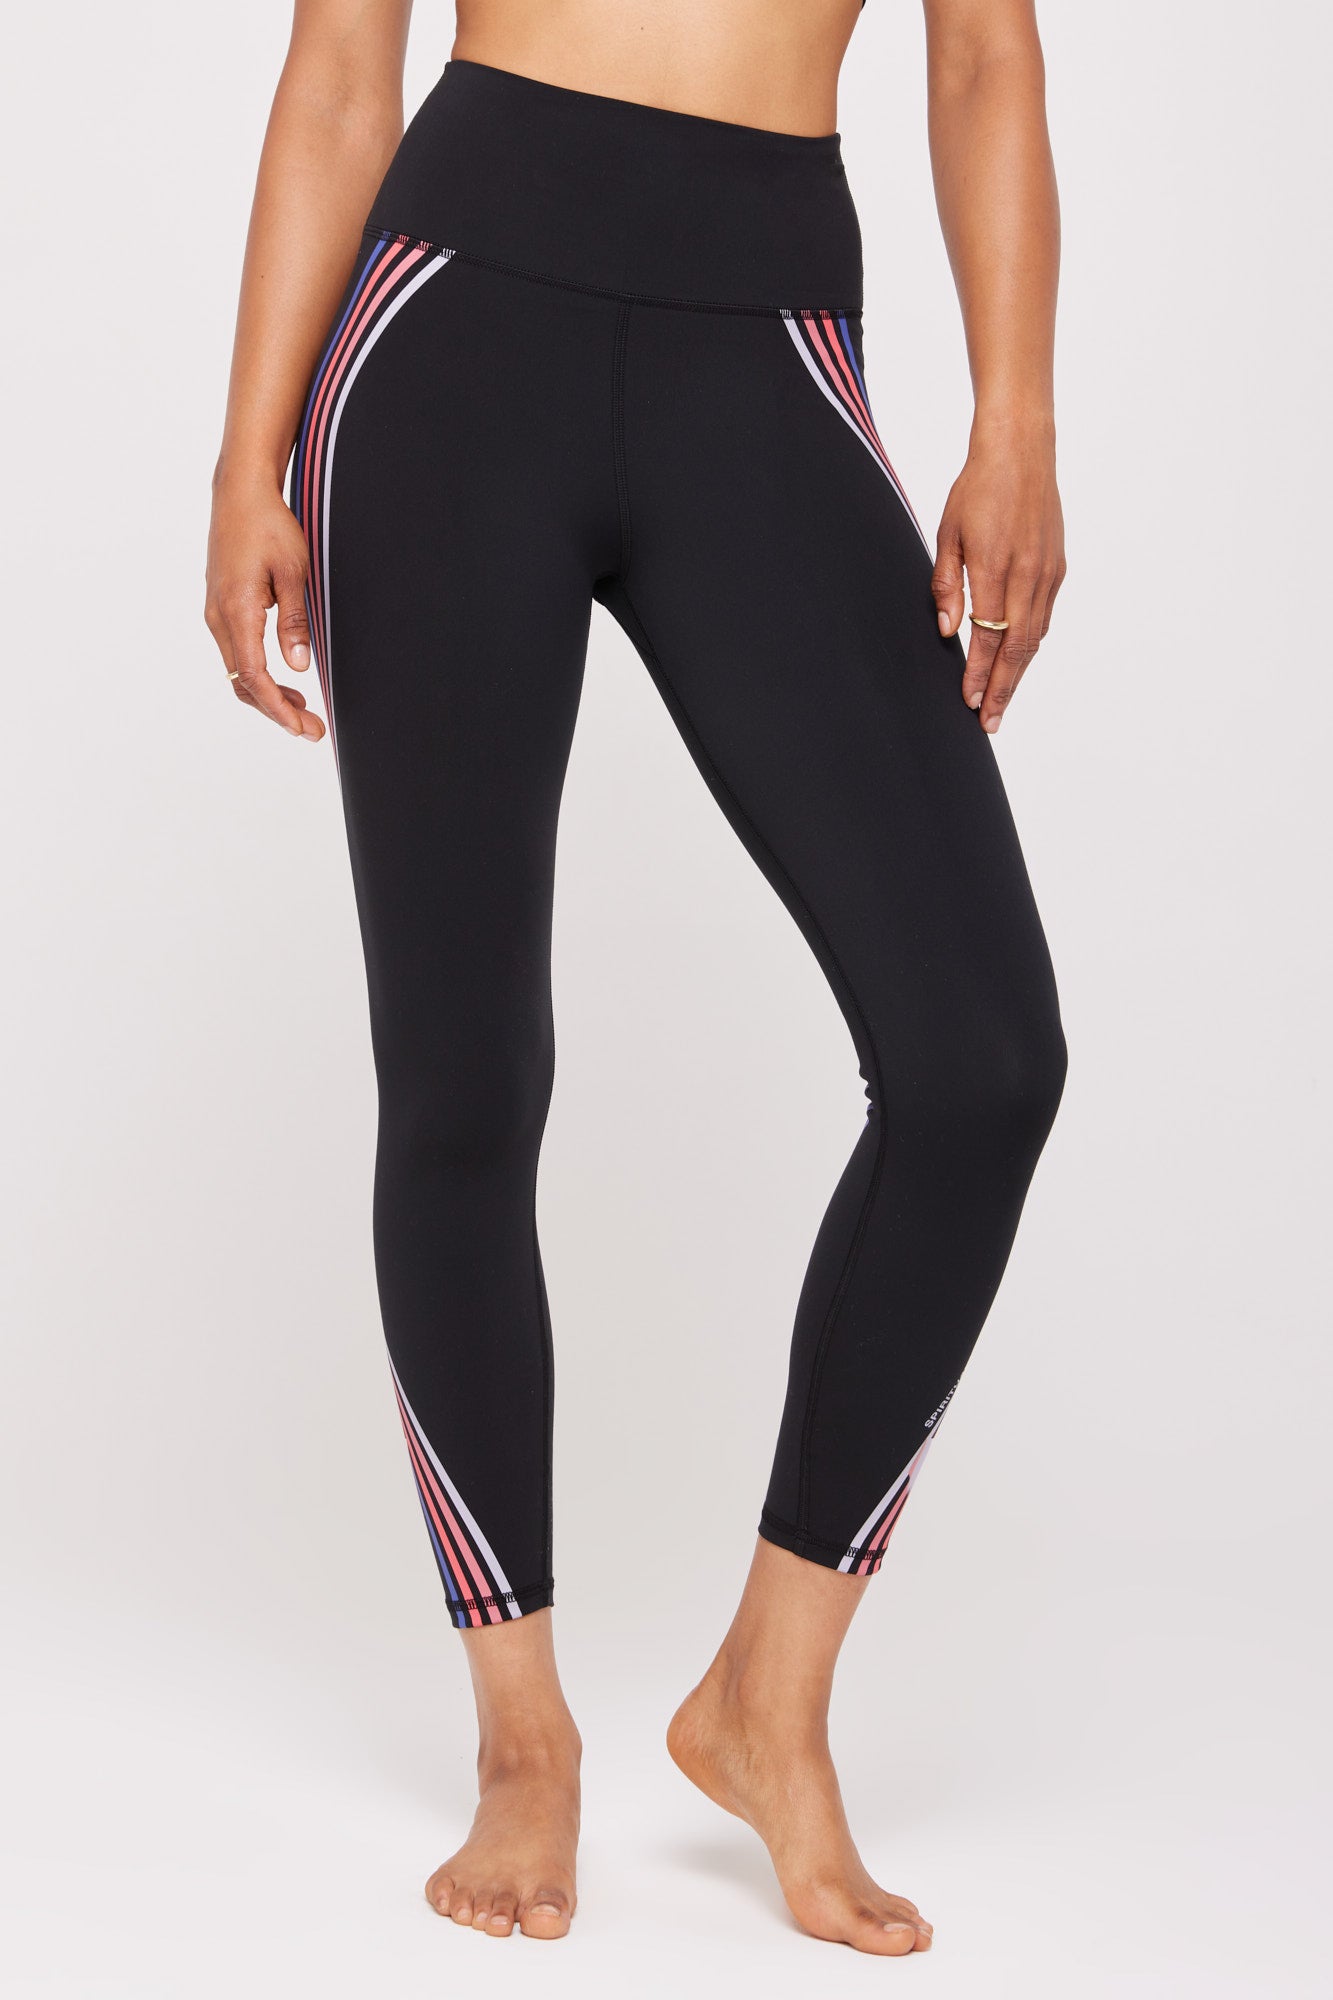 White Stripe Accent High Waisted Plus Size Leggings - Thick | USA Fashion